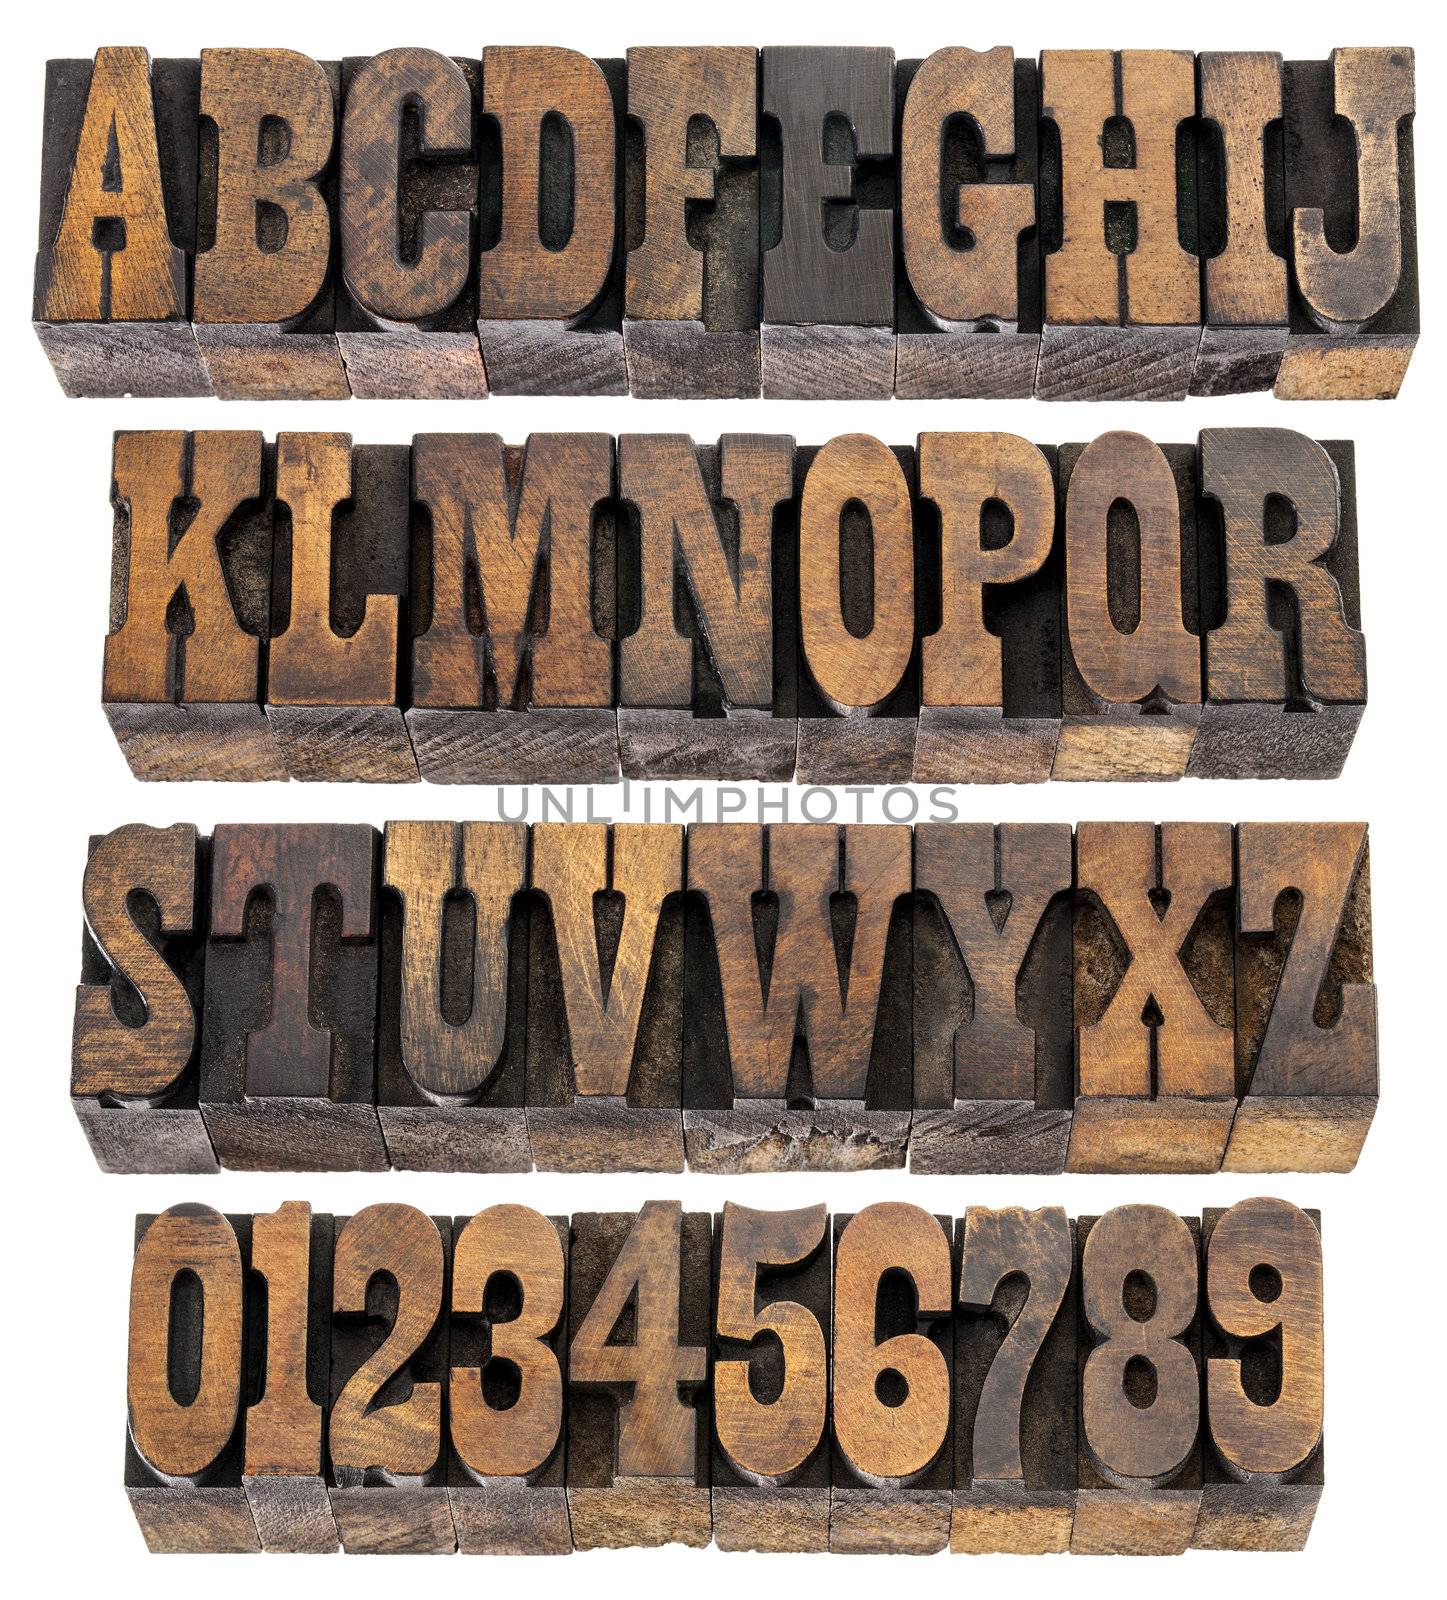 isolated rows of letters and numbers in vintage letterpress wood type blocks, French Clarendon font popular in western movies and memorabilia